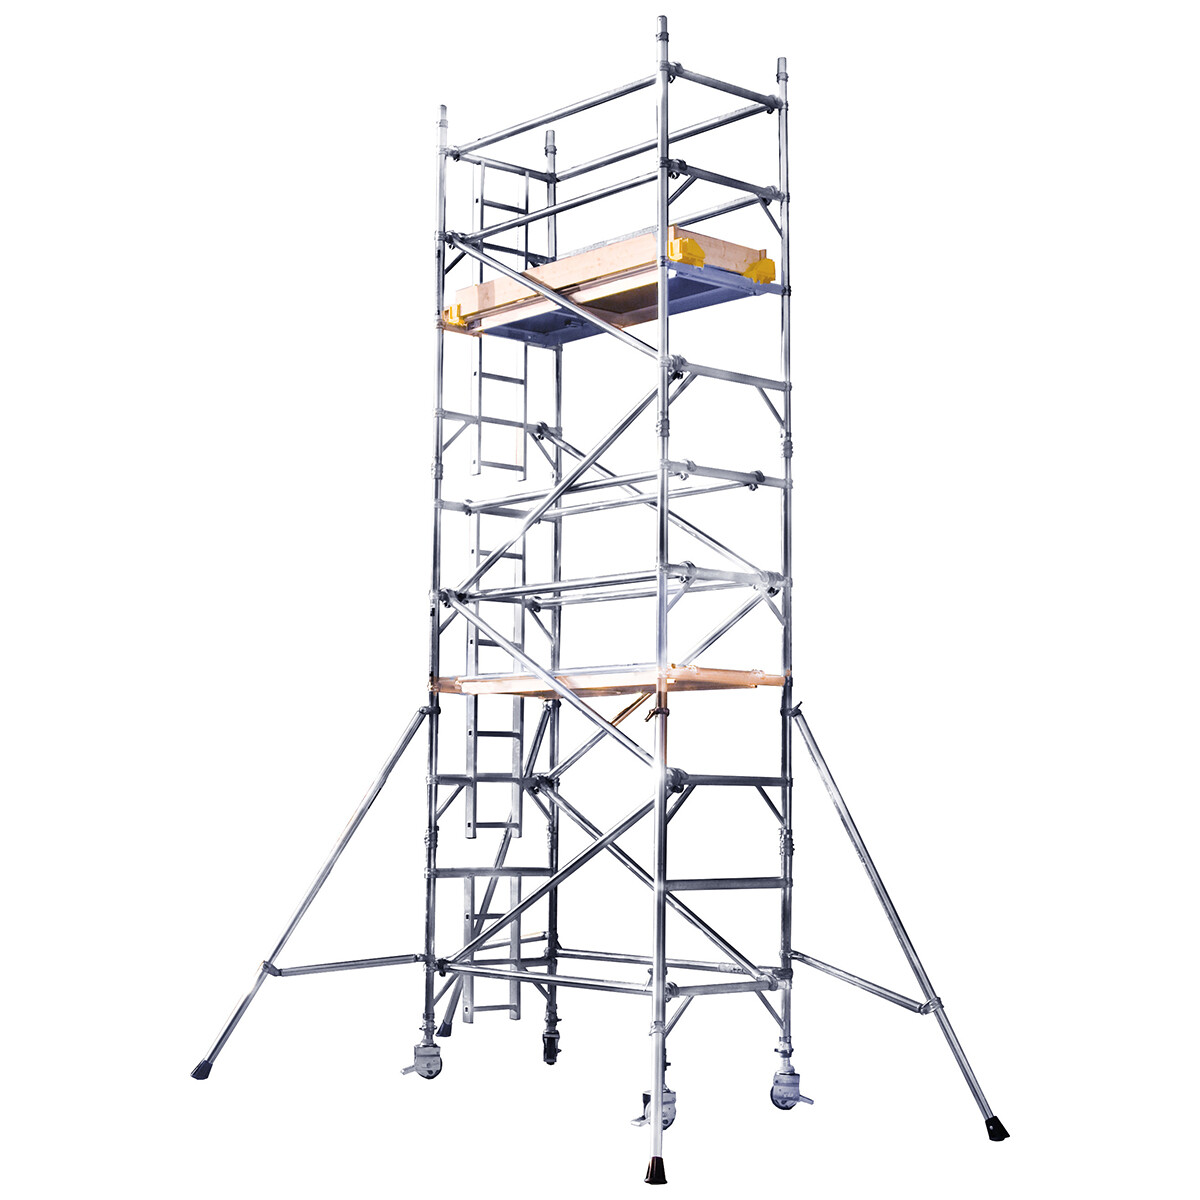 Narrow Span Mobile Tower - 0.85m wide x 3.3m high